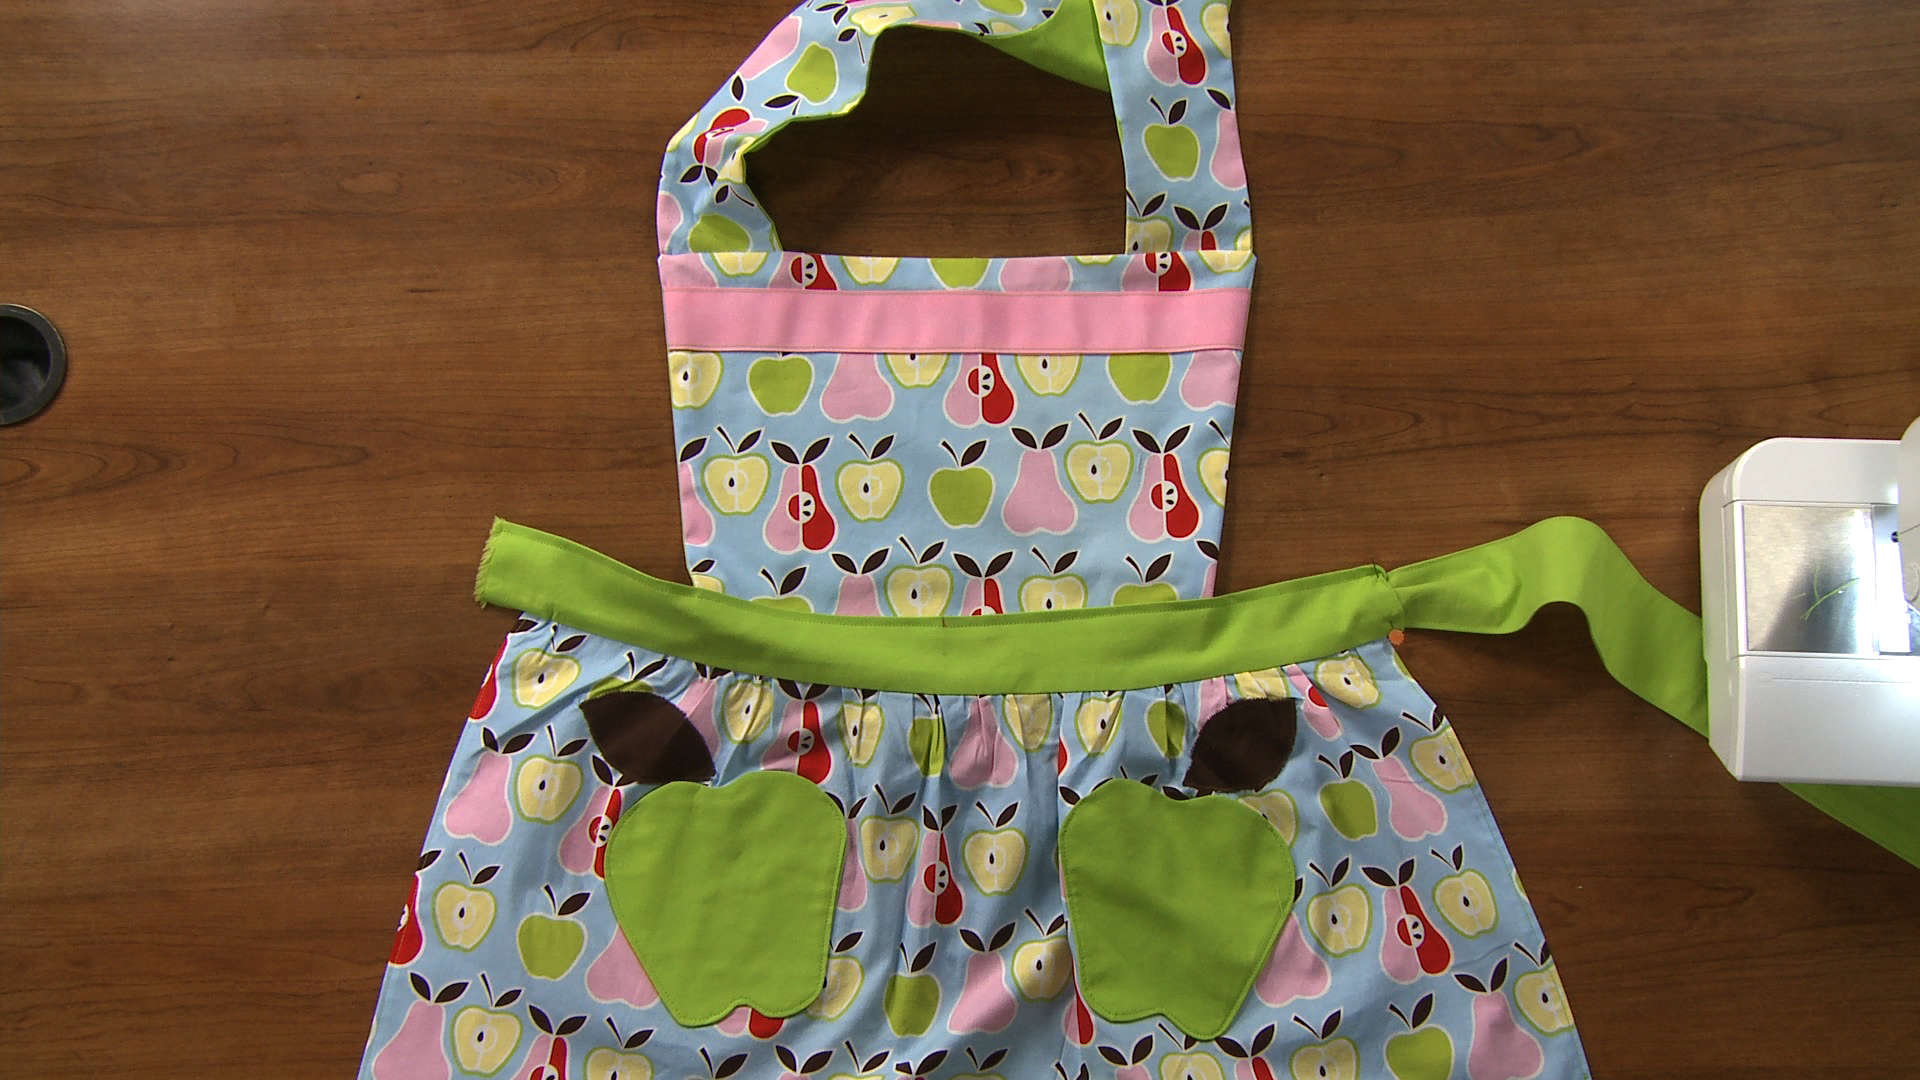 Vintage Inspiration: How to Make an Apron product featured image thumbnail.